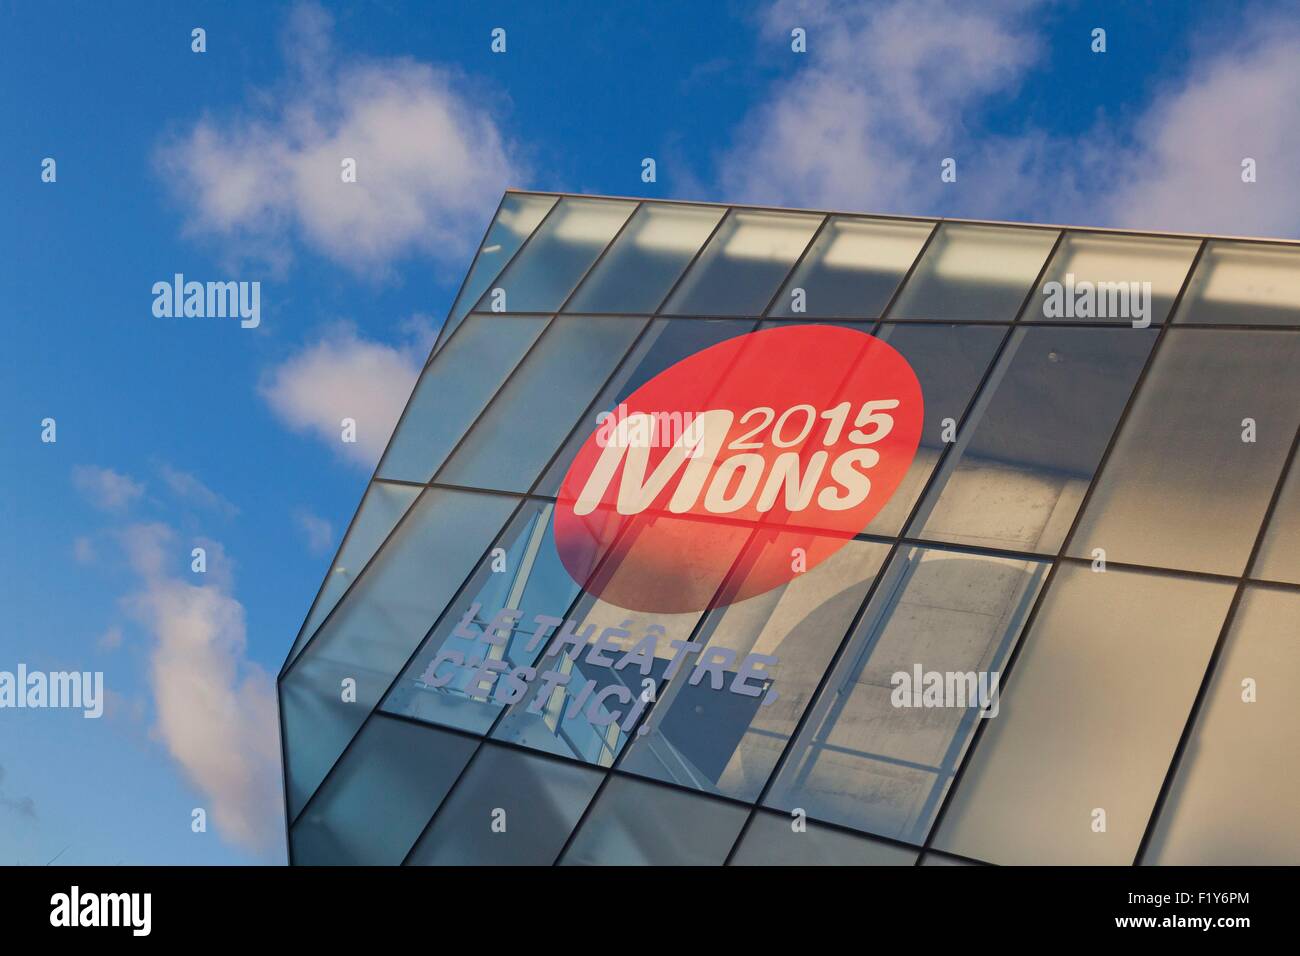 Belgium, Wallonia, Hainaut province, Mons, European Capital of Culture 2015, mons 2015 logo on the front of the arena theater Stock Photo